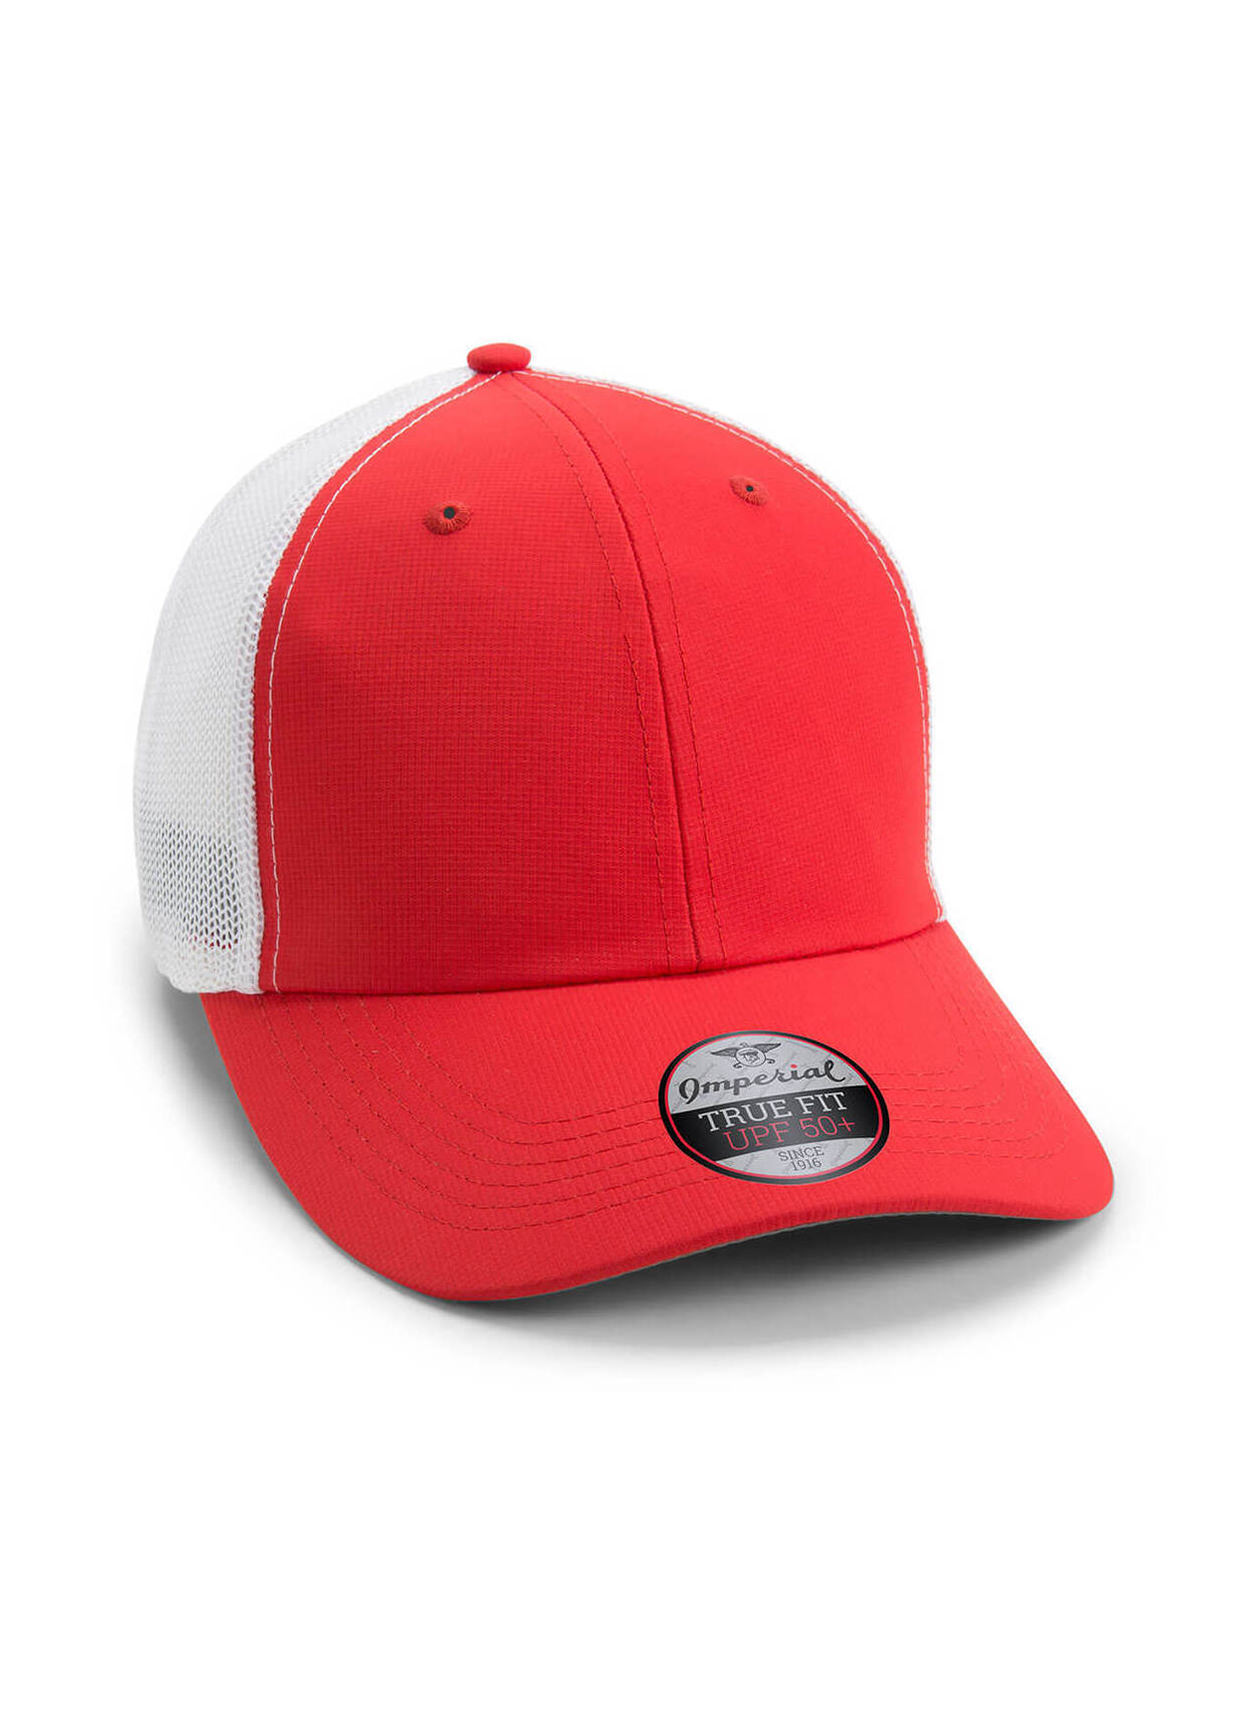 Imperial Red / White Structured Performance Meshback Hat